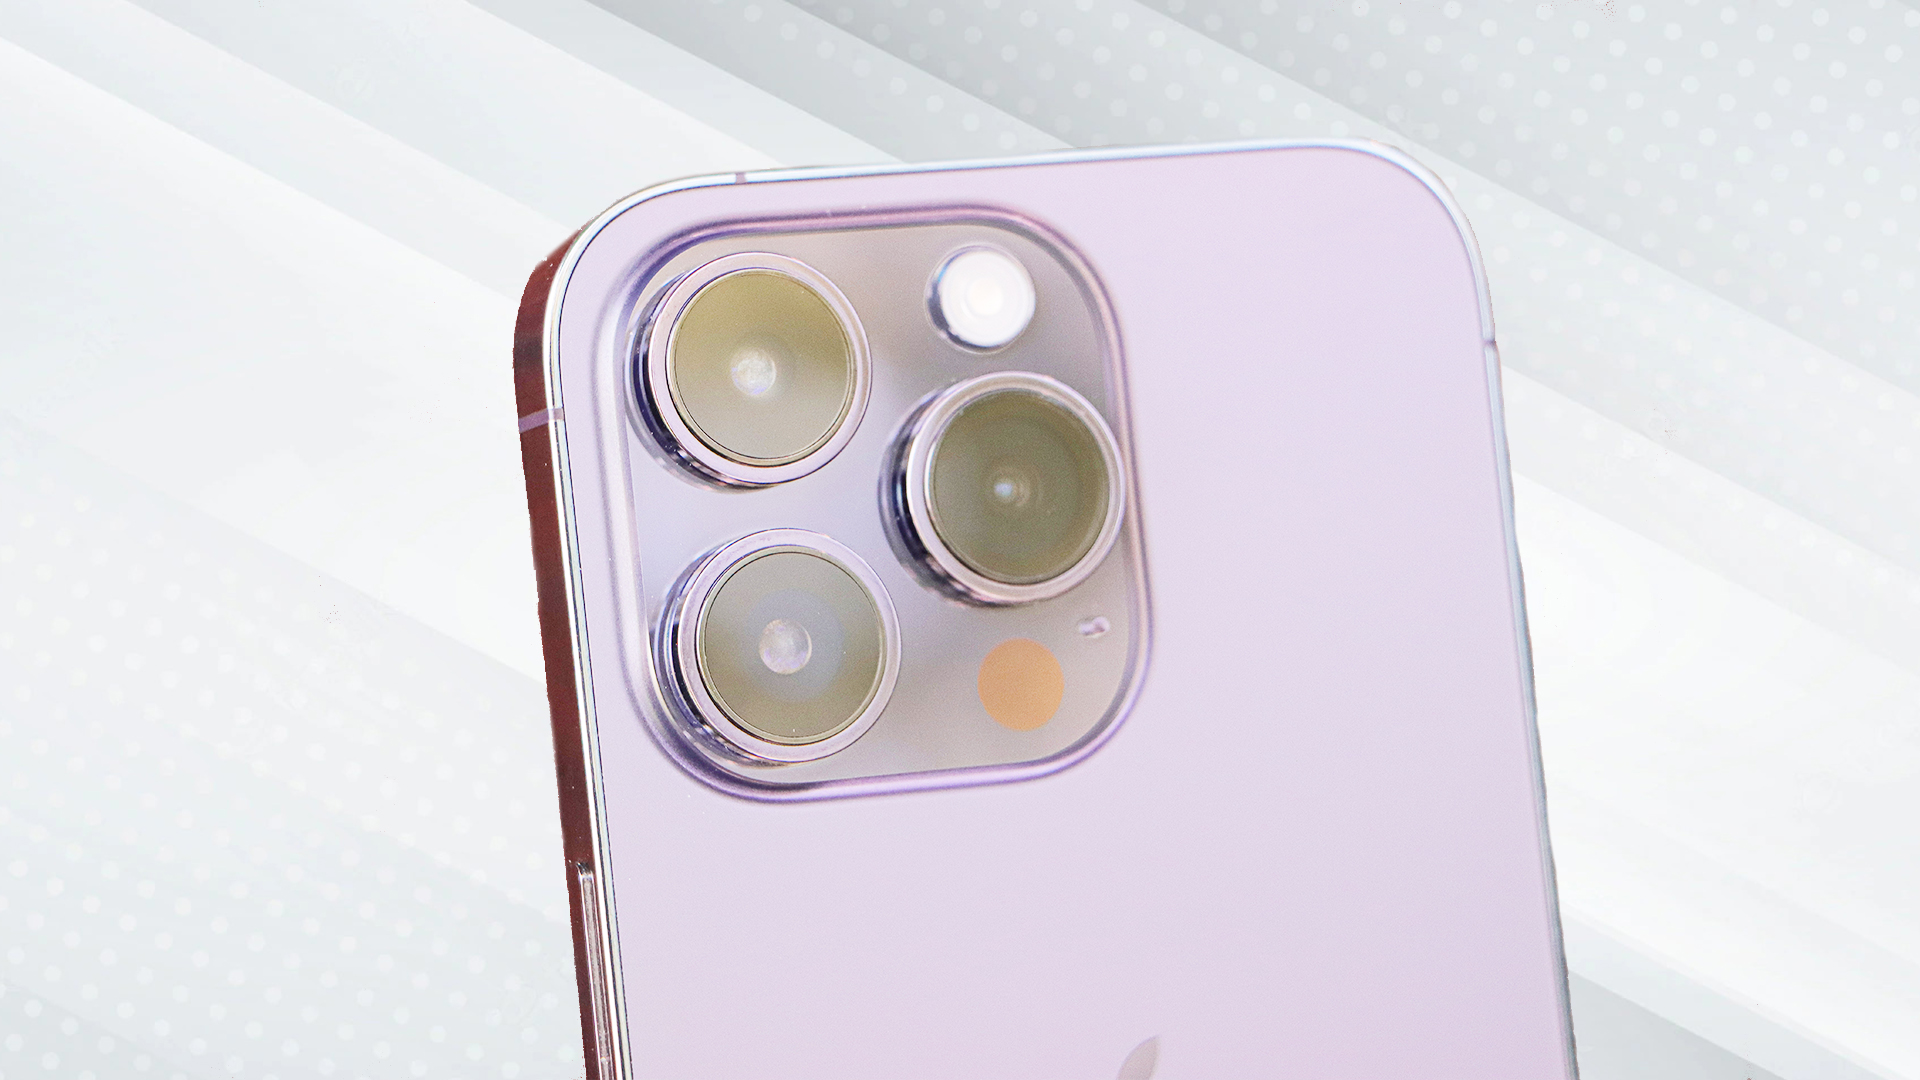 iPhone 15 Pro may not get this Main camera upgrade after all